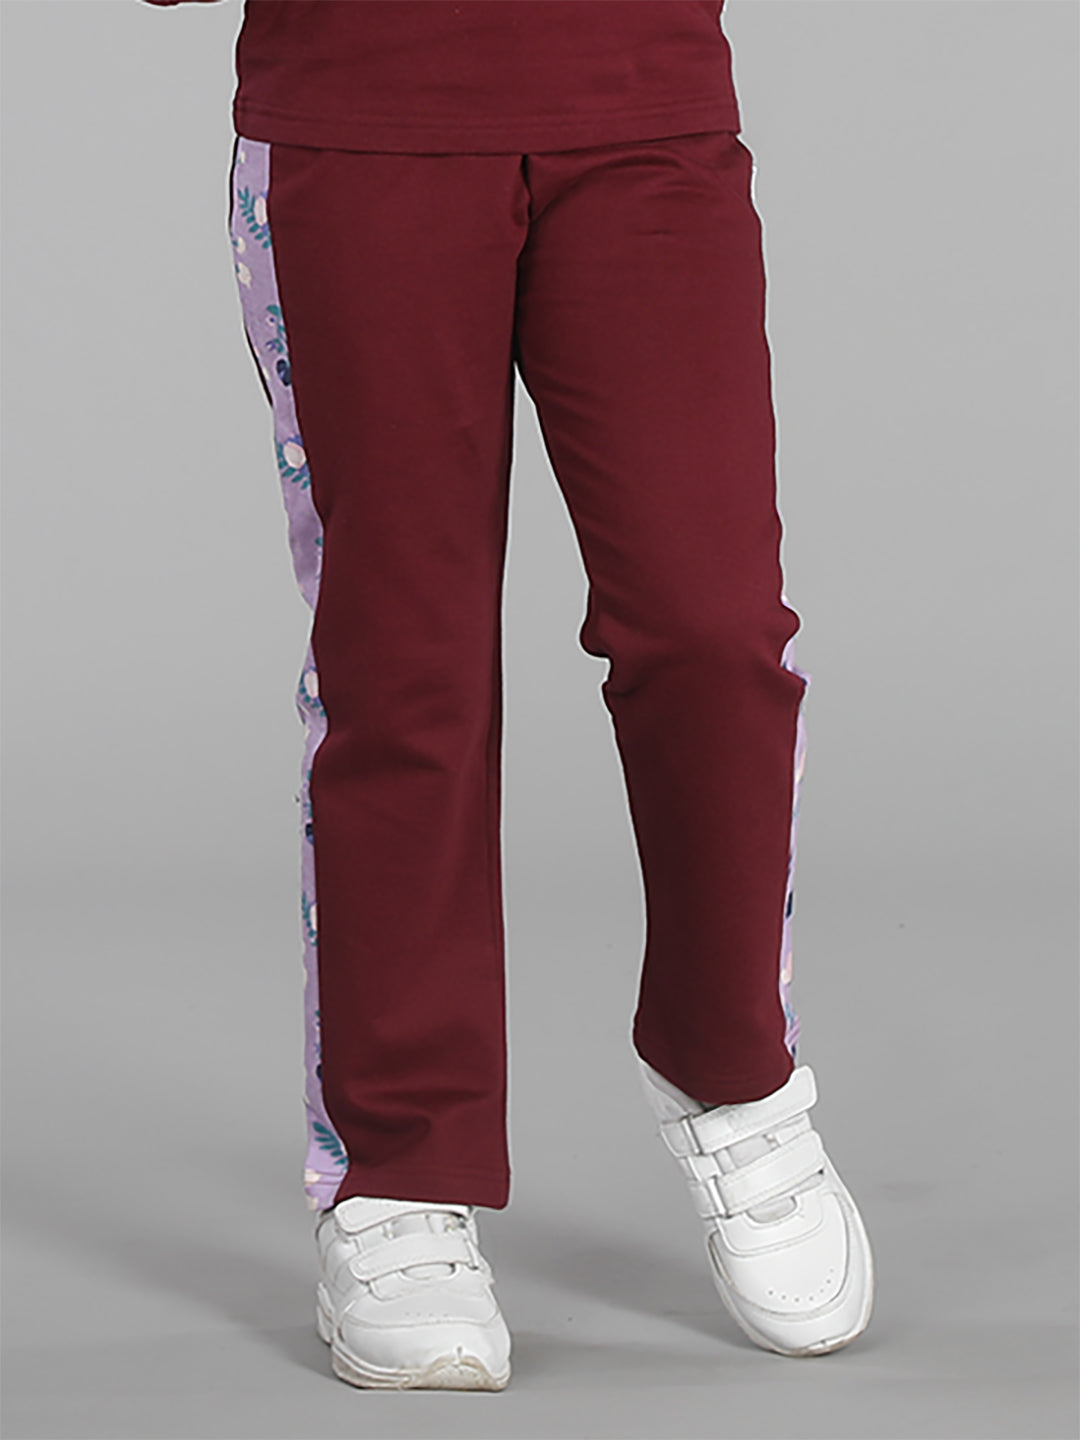 Girls Pant with Side Aop Detail